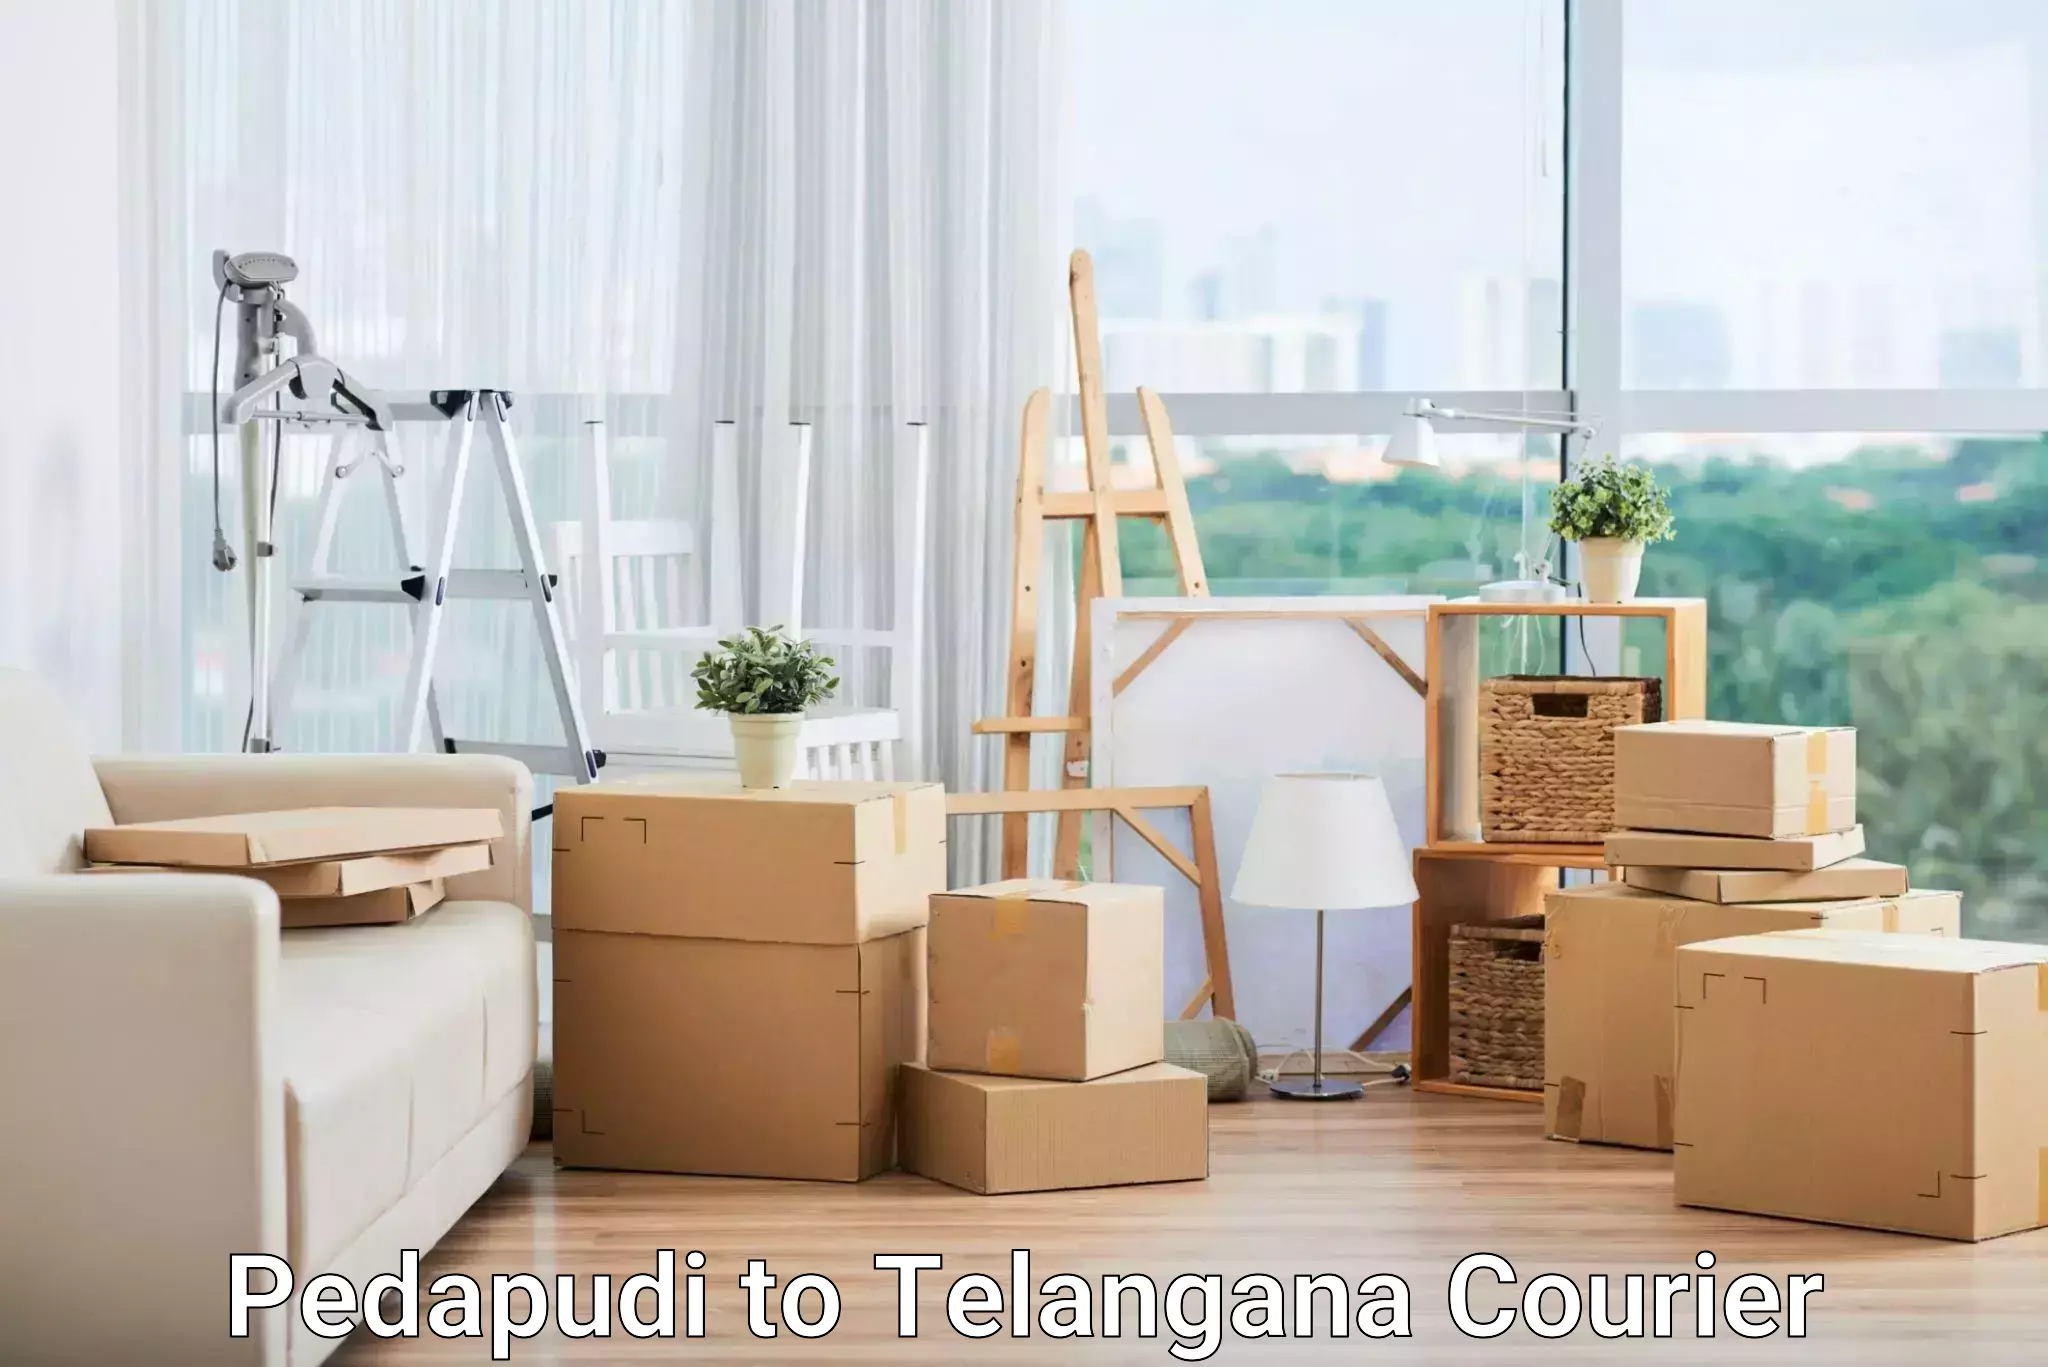 Express courier capabilities in Pedapudi to Pathipaka